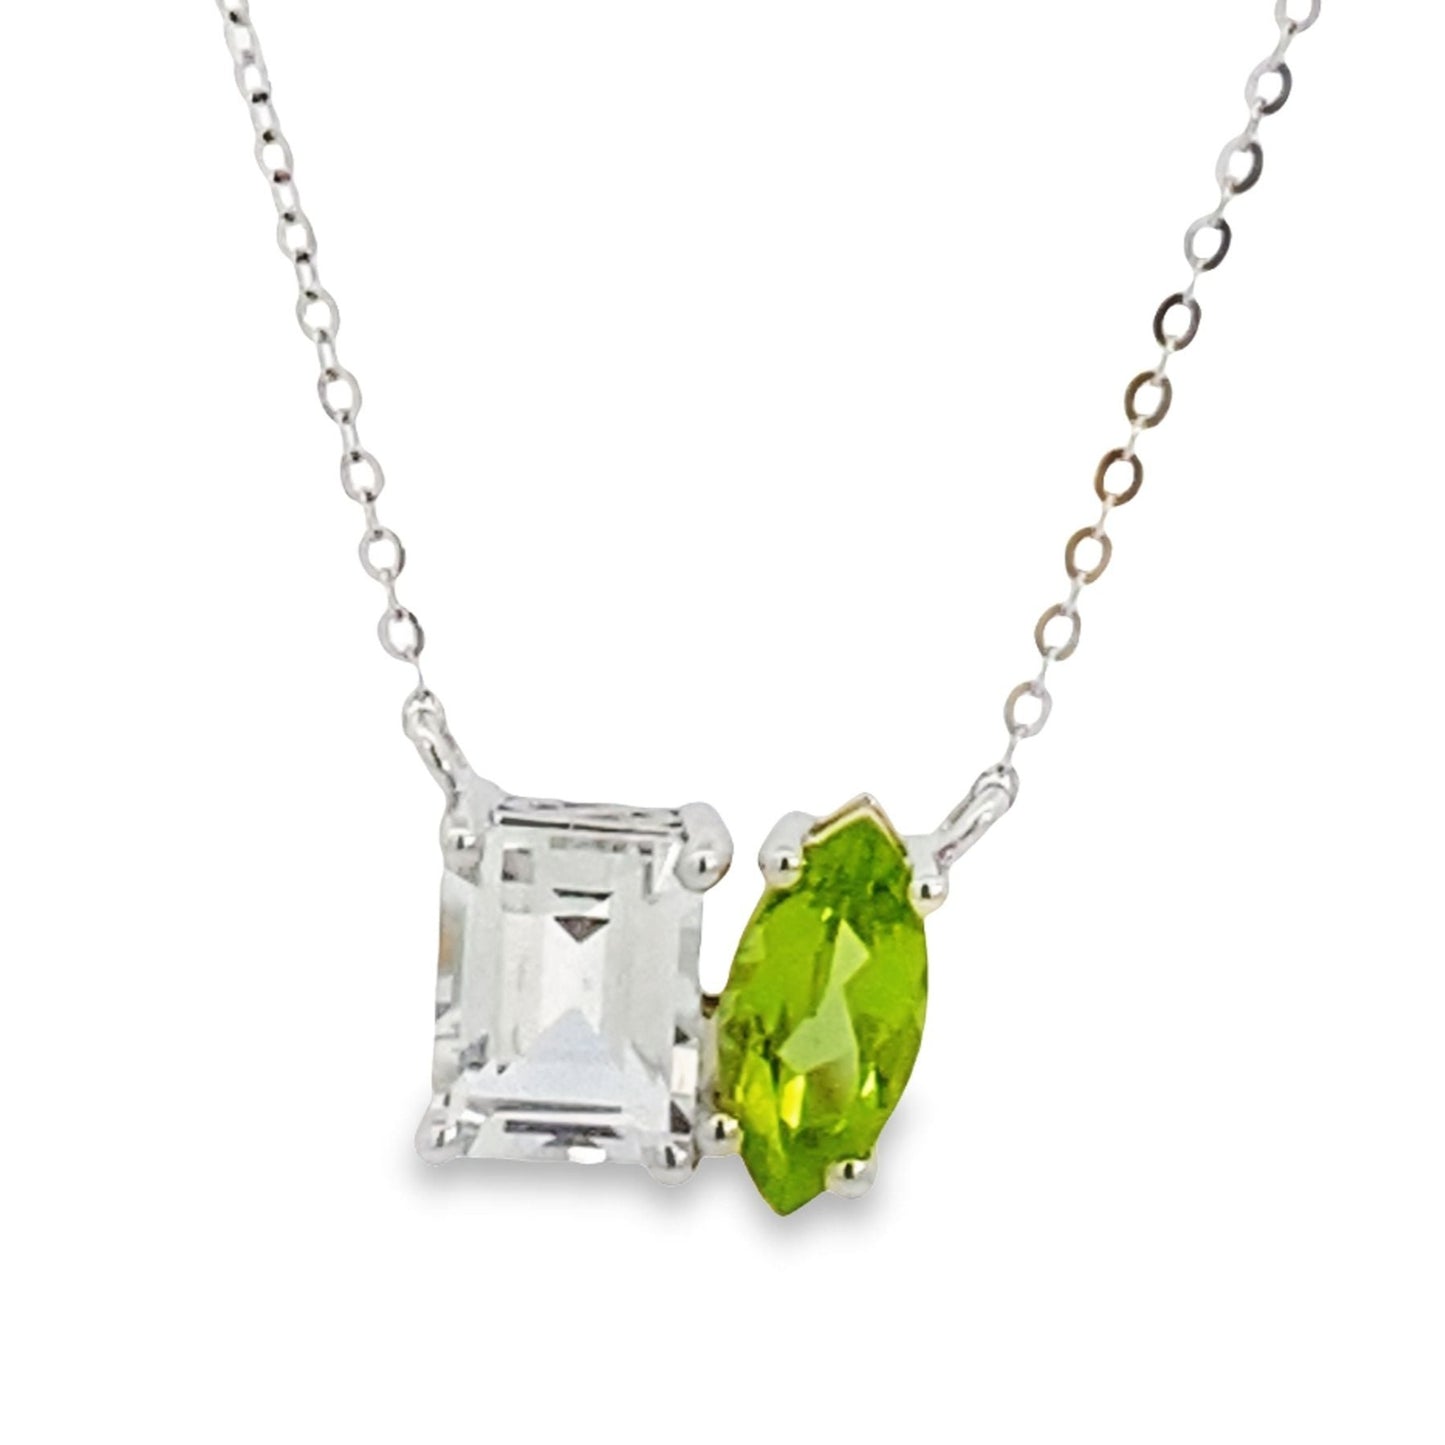 Luvente | 14K Gold Geometric Peridot and White Topaz Necklace